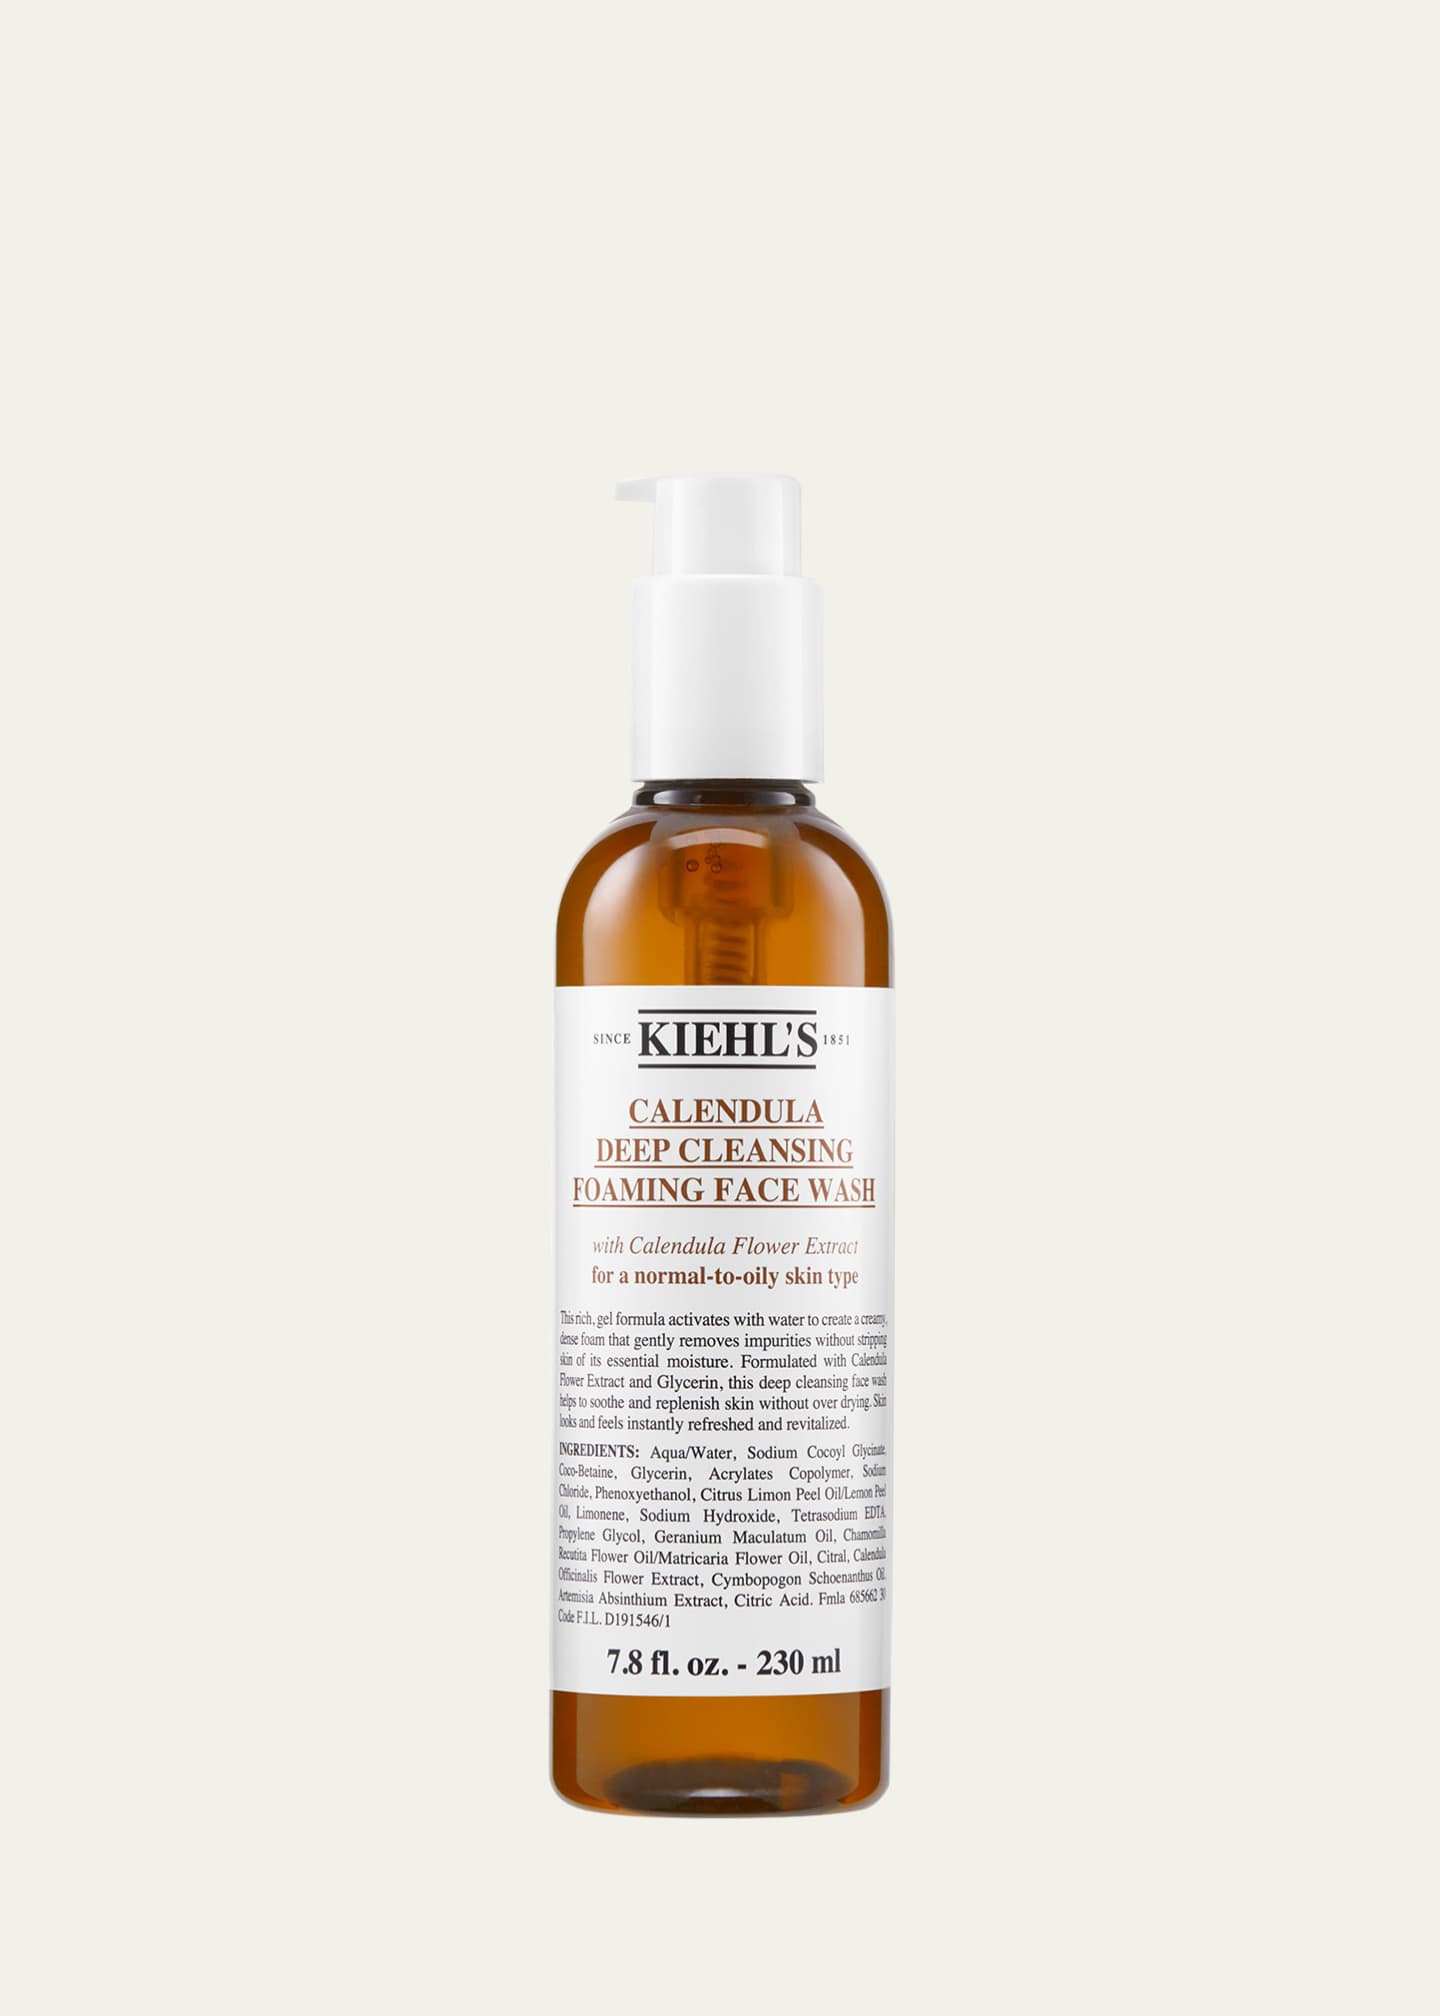 Kiehl's Since 1851 Calendula Deep Cleansing Foaming Face Wash, 7.8 oz. Image 1 of 5